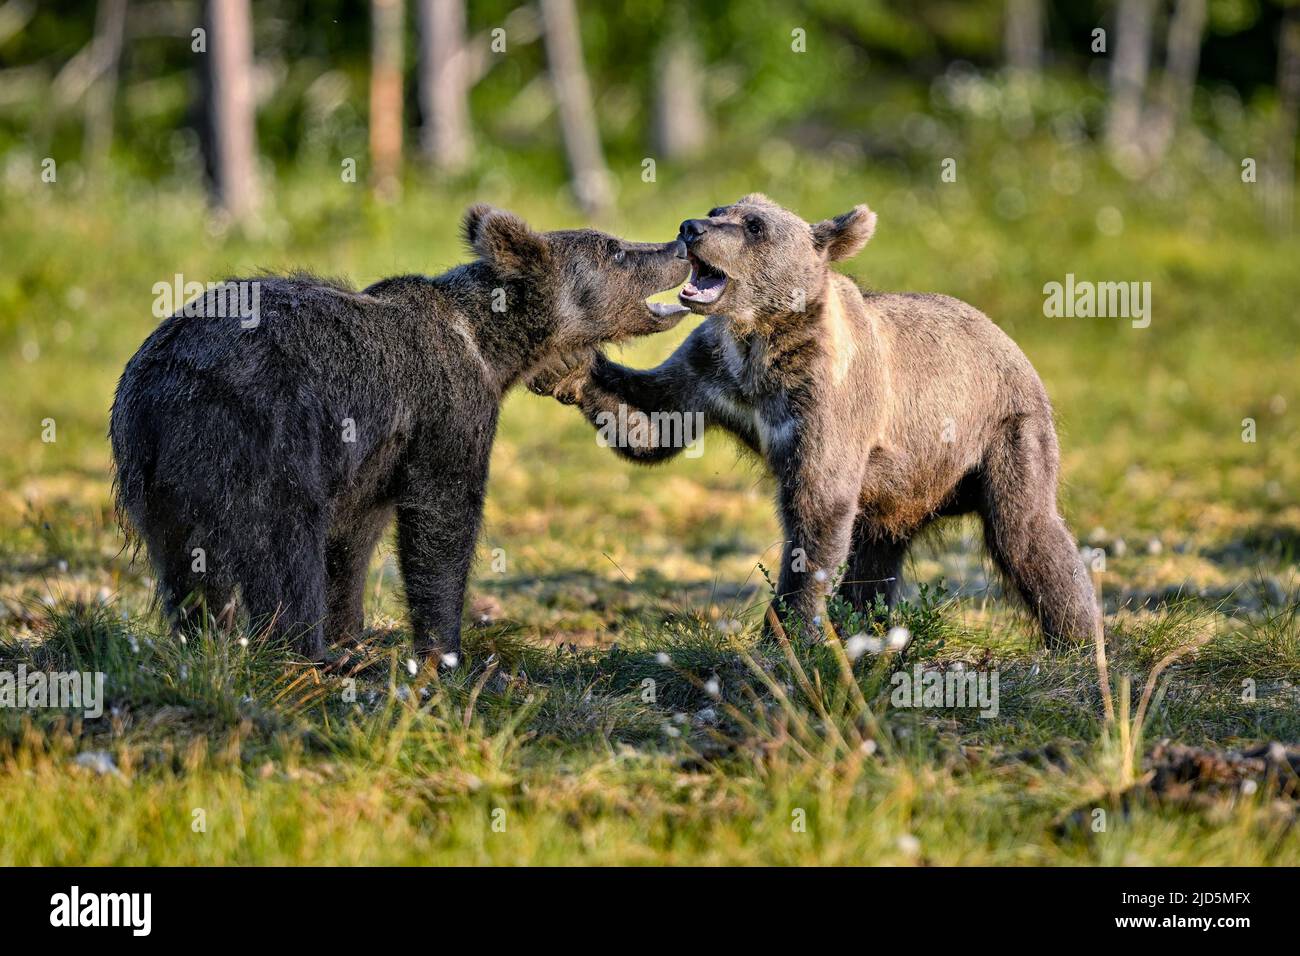 Brown bear yearlings are challenging each other at the swamp. Stock Photo